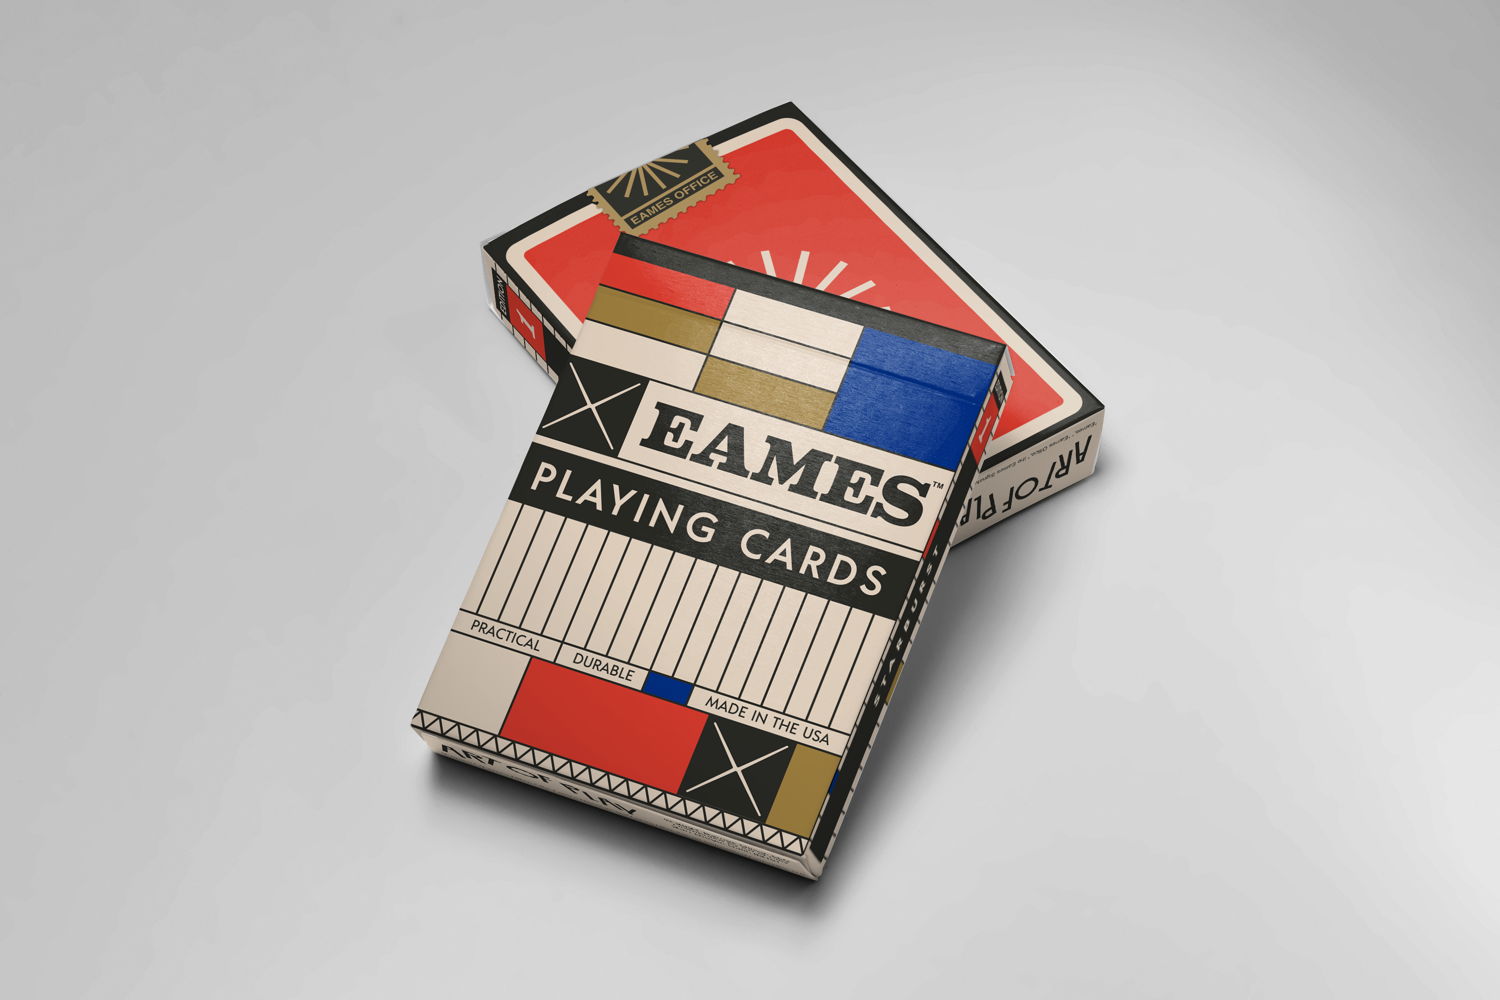 Art of Play Eames Playing Cards